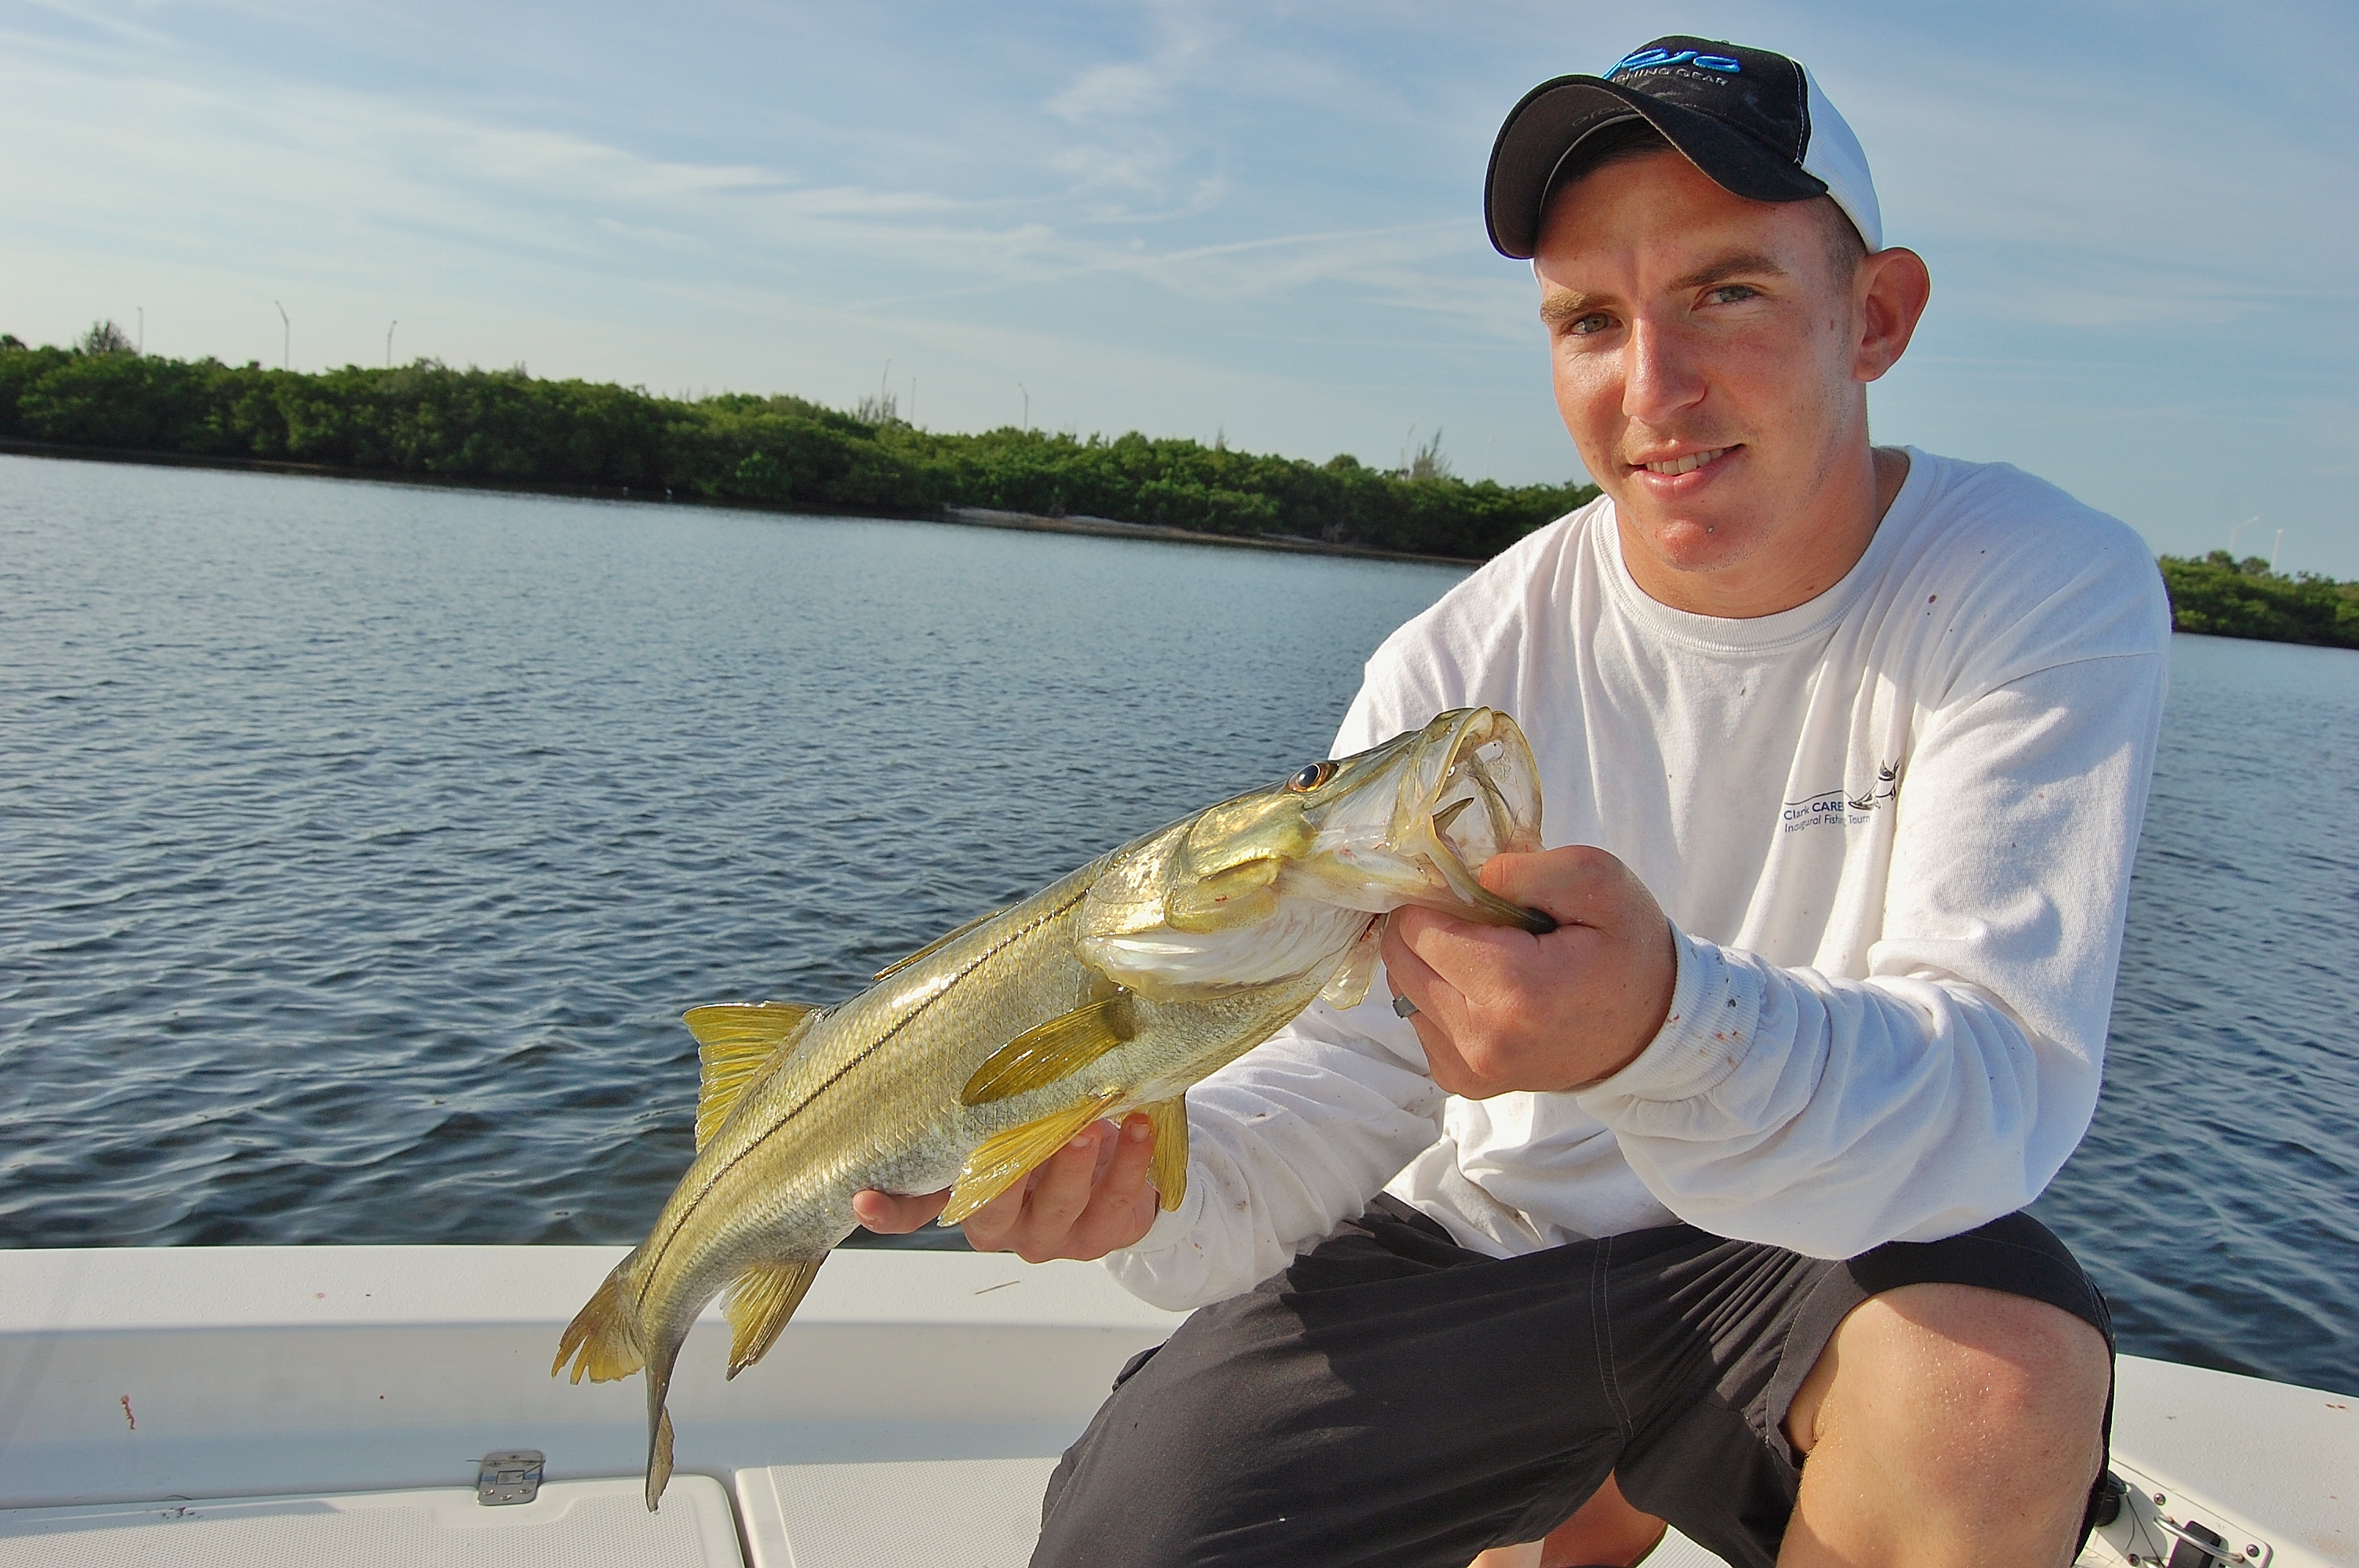 Snook Fishing Charters tampa